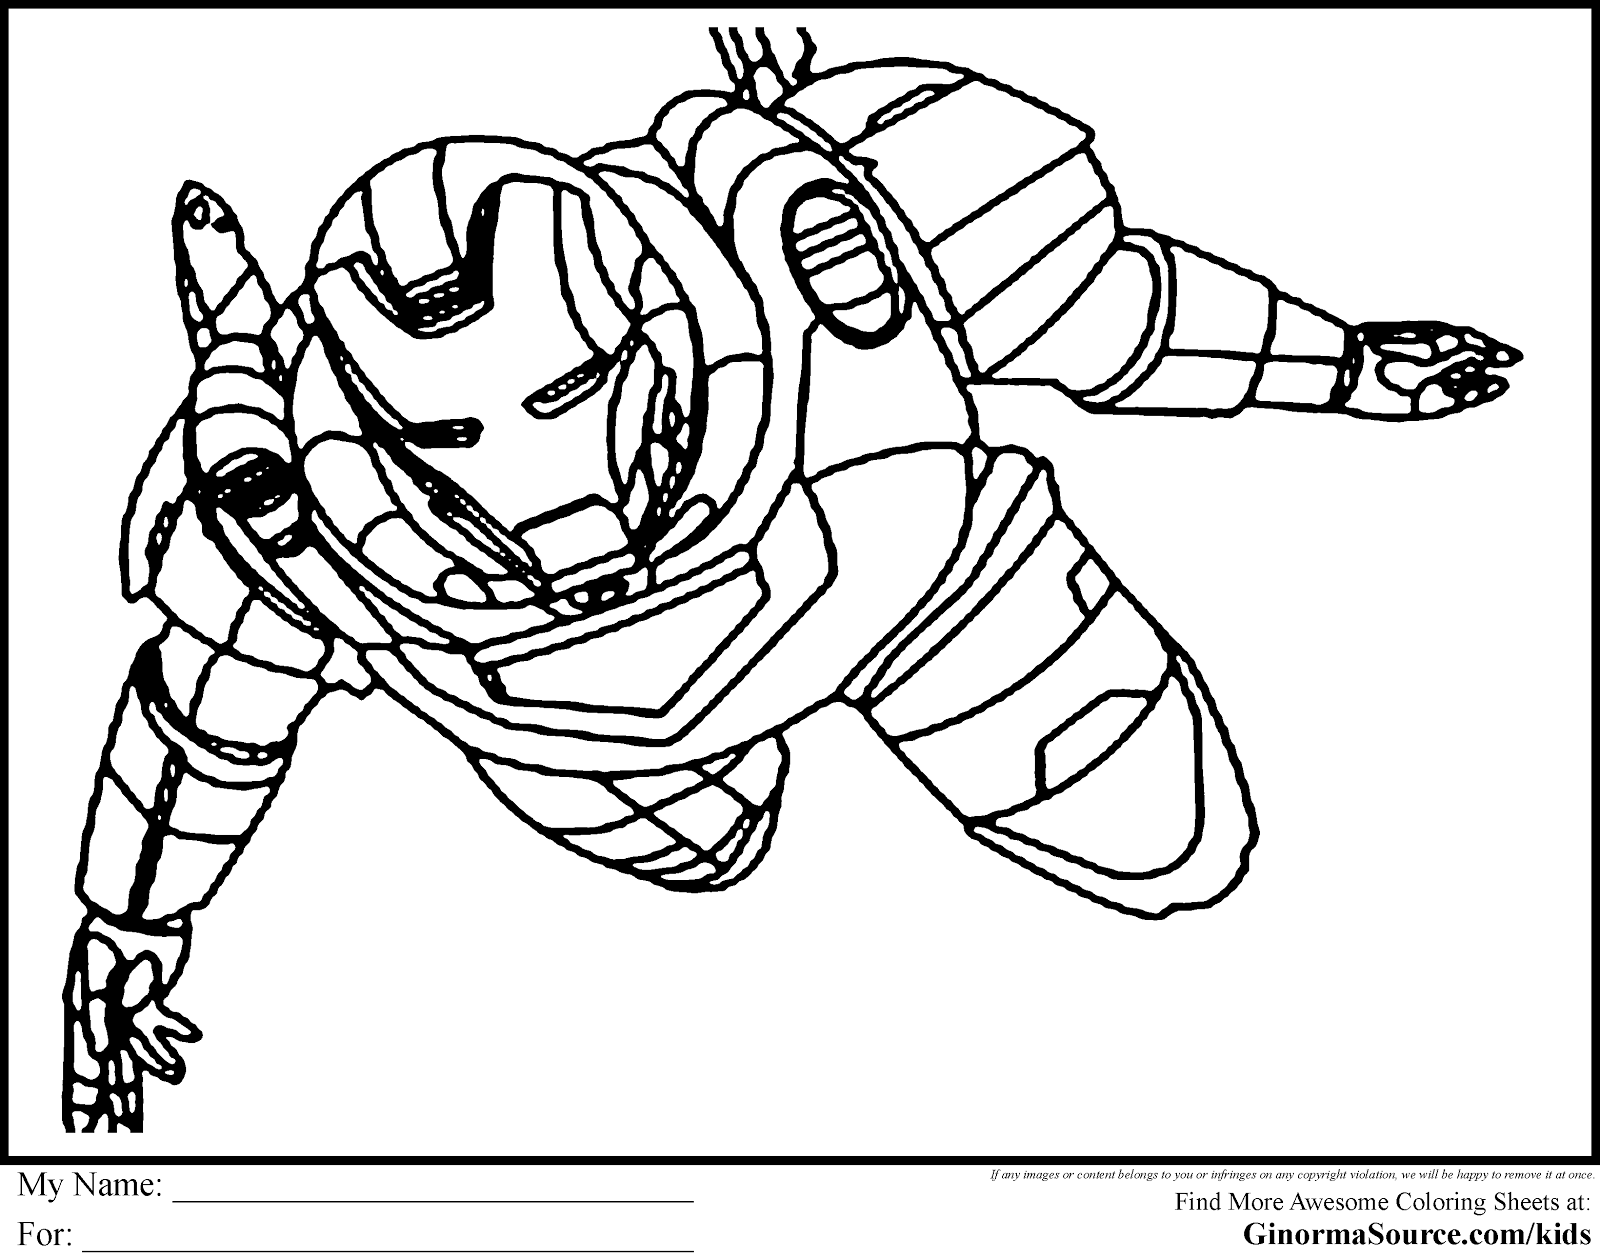 superhero coloring page to print,printable,coloring pages